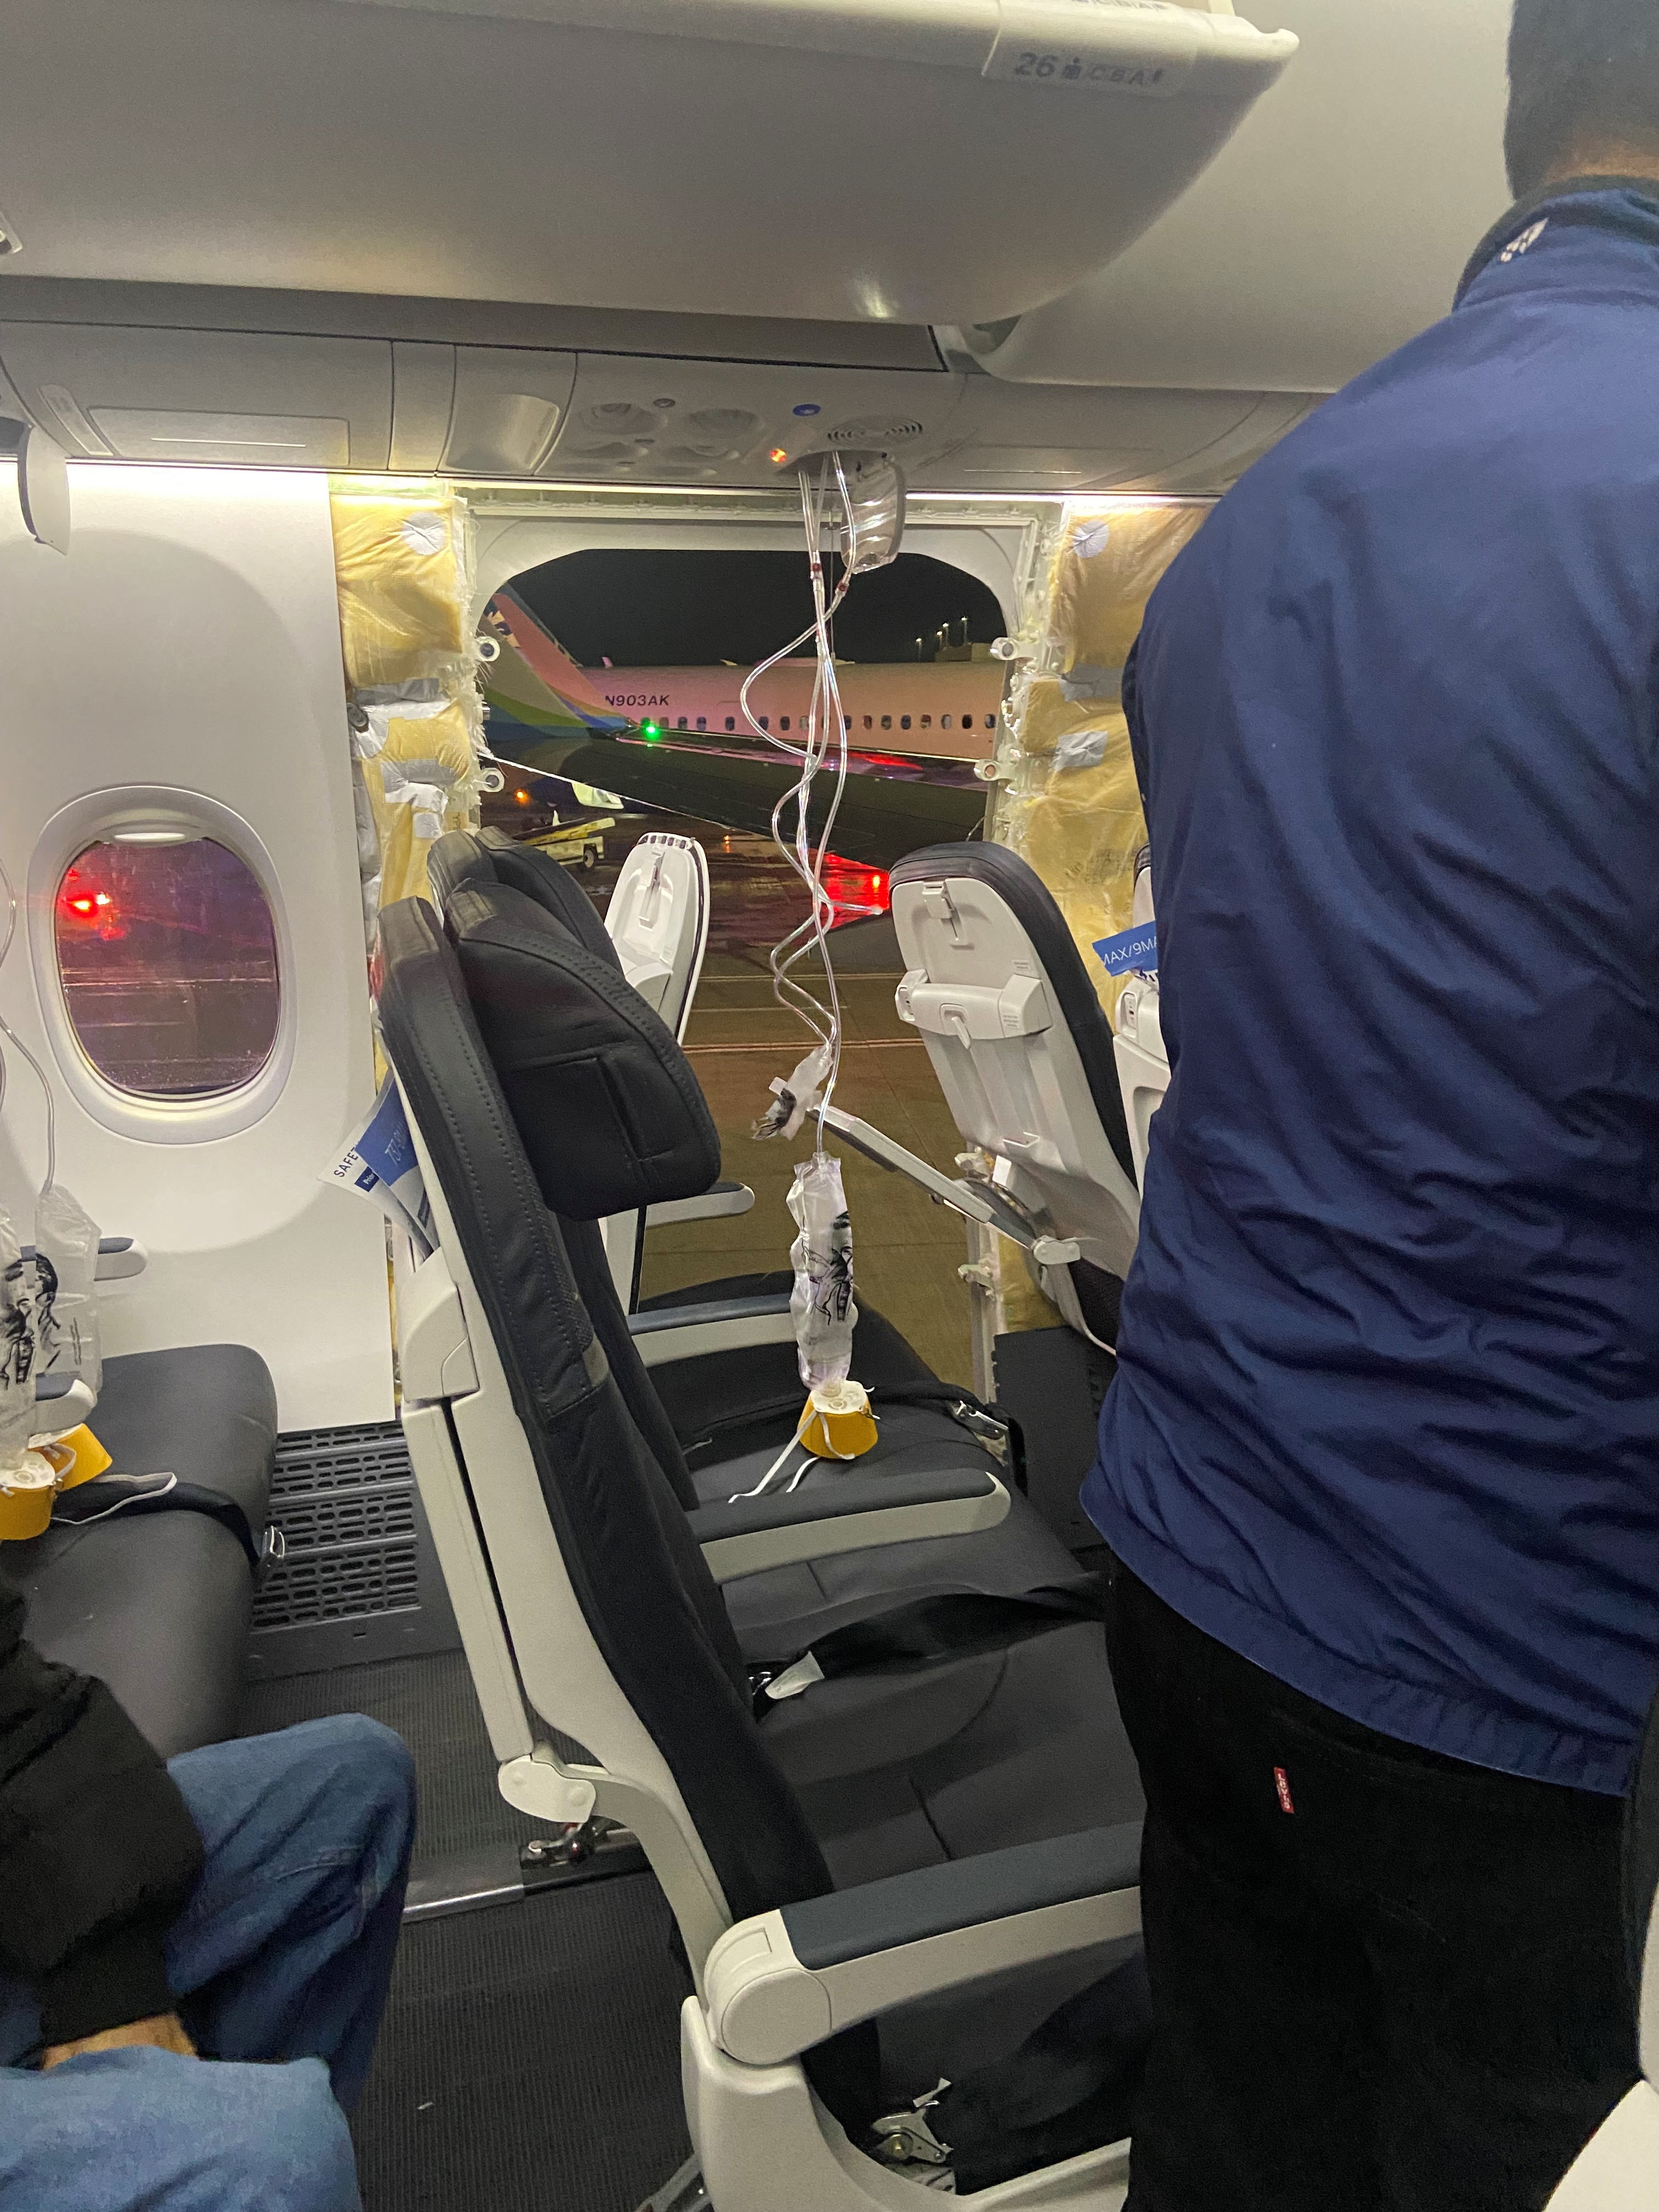 Passenger oxygen masks hang from the roof next to a missing window and a portion of a side wall of an Alaska Airlines Flight 1282, which had been bound for Ontario, California and suffered depressurization soon after departing, in Portland, Oregon, U.S., January 5, 2024 in this picture obtained from social media.